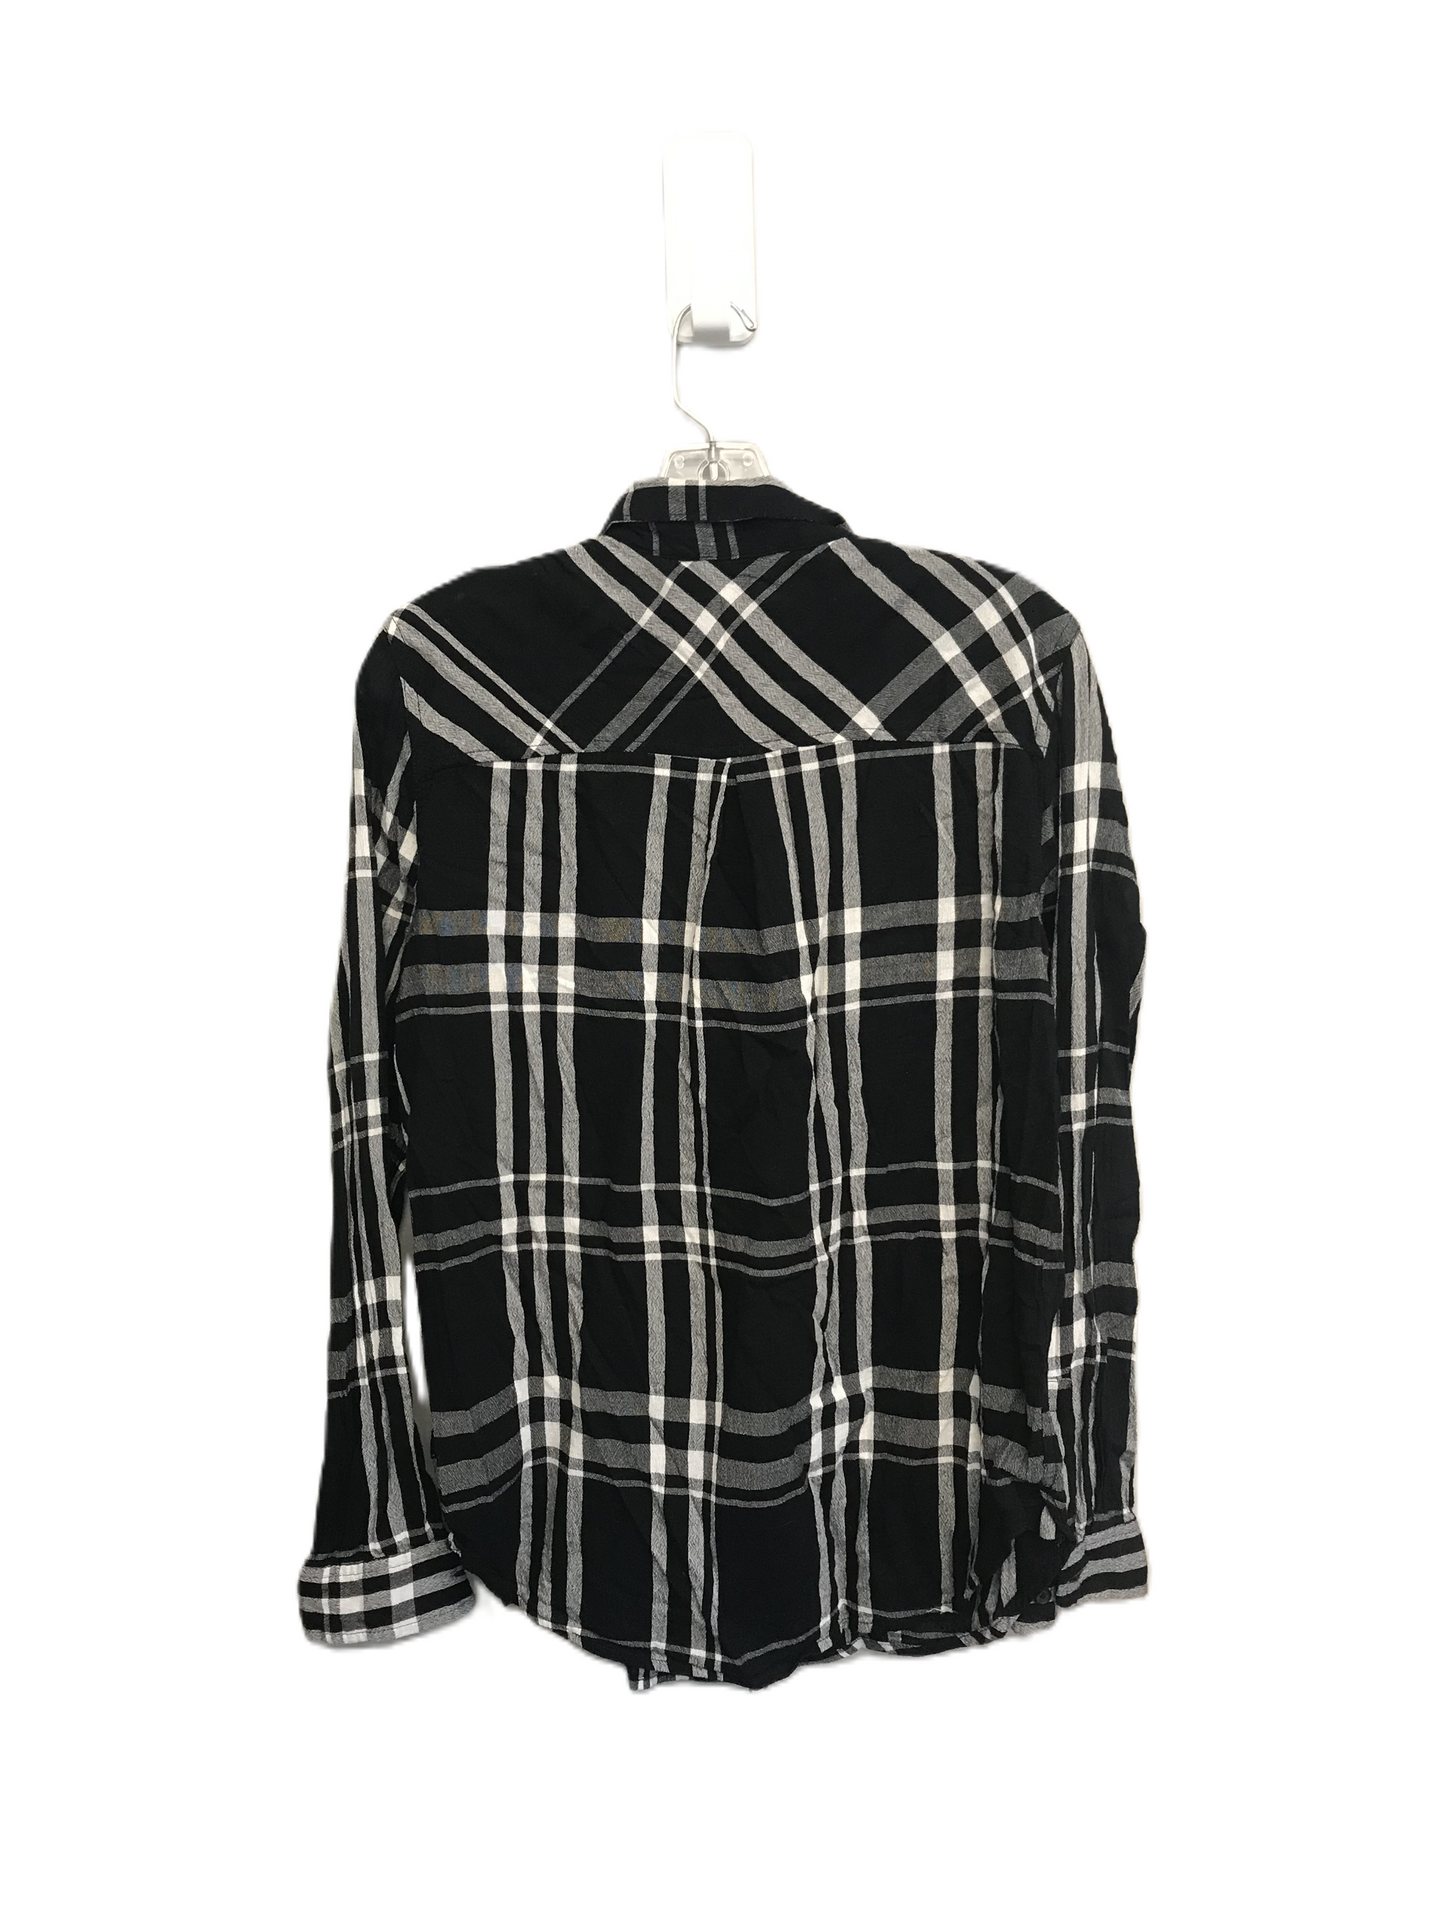 Plaid Pattern Top Long Sleeve By Lucky Brand, Size: M